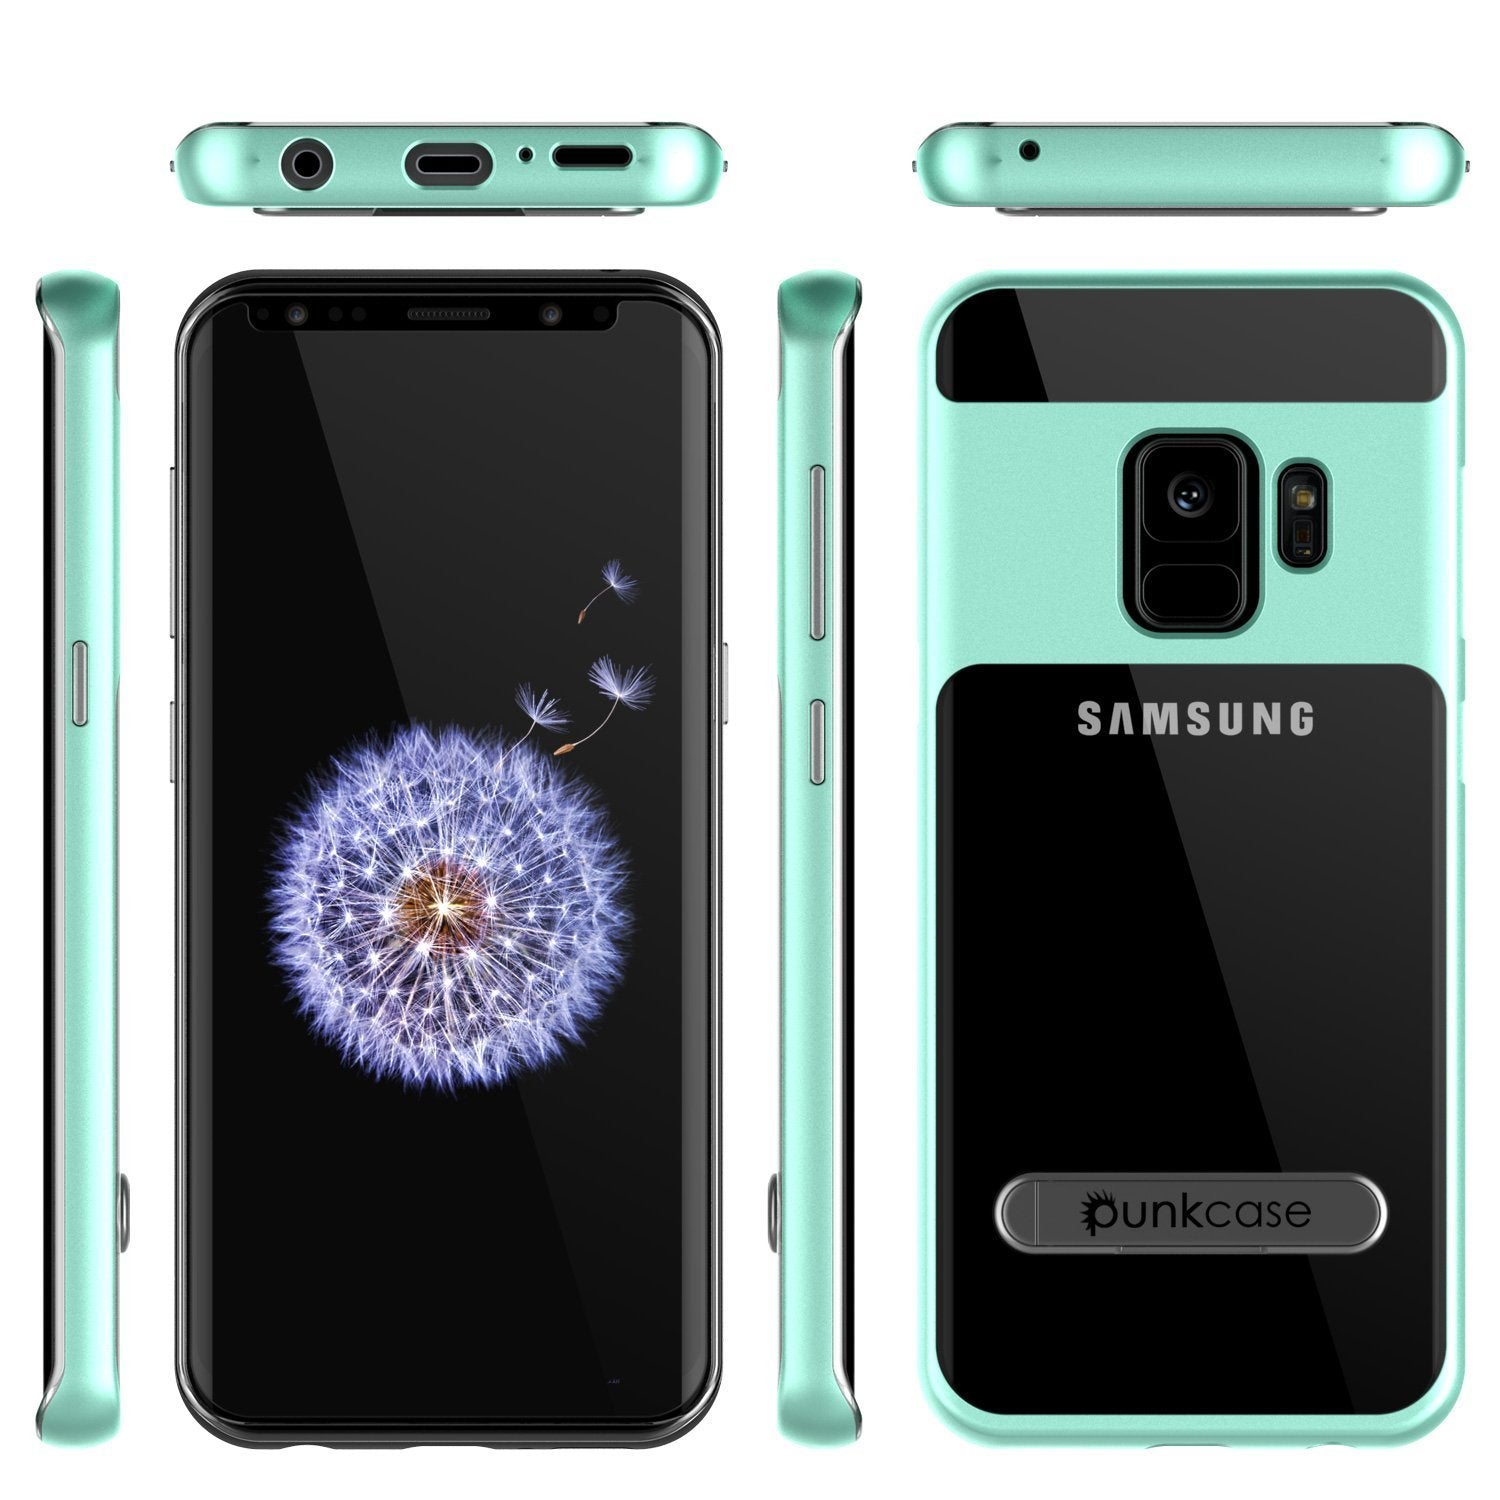 Galaxy S9 Punkcase, LUCID 3.0 Series Cover w/Kickstand, Teal